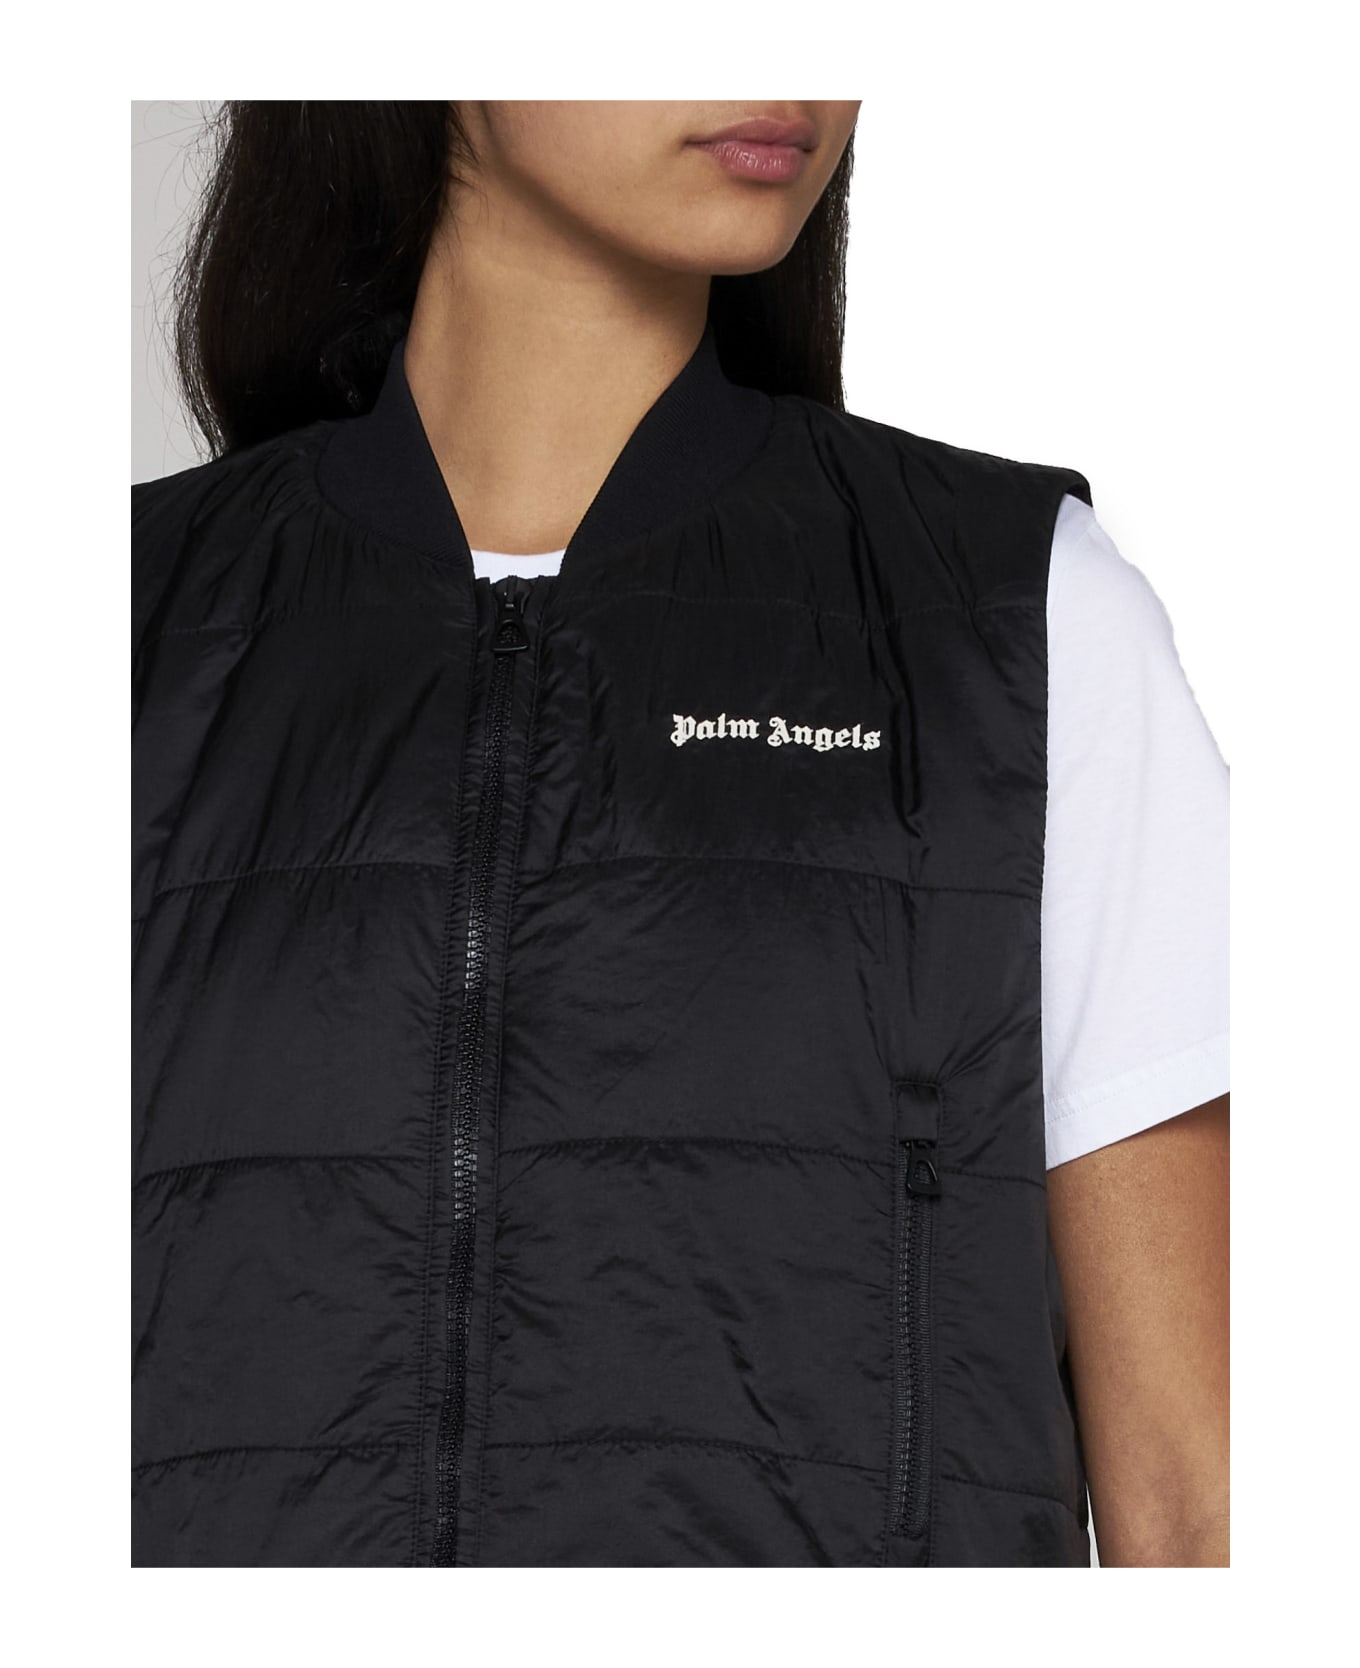 Palm Angels Down Jacket - Black off white